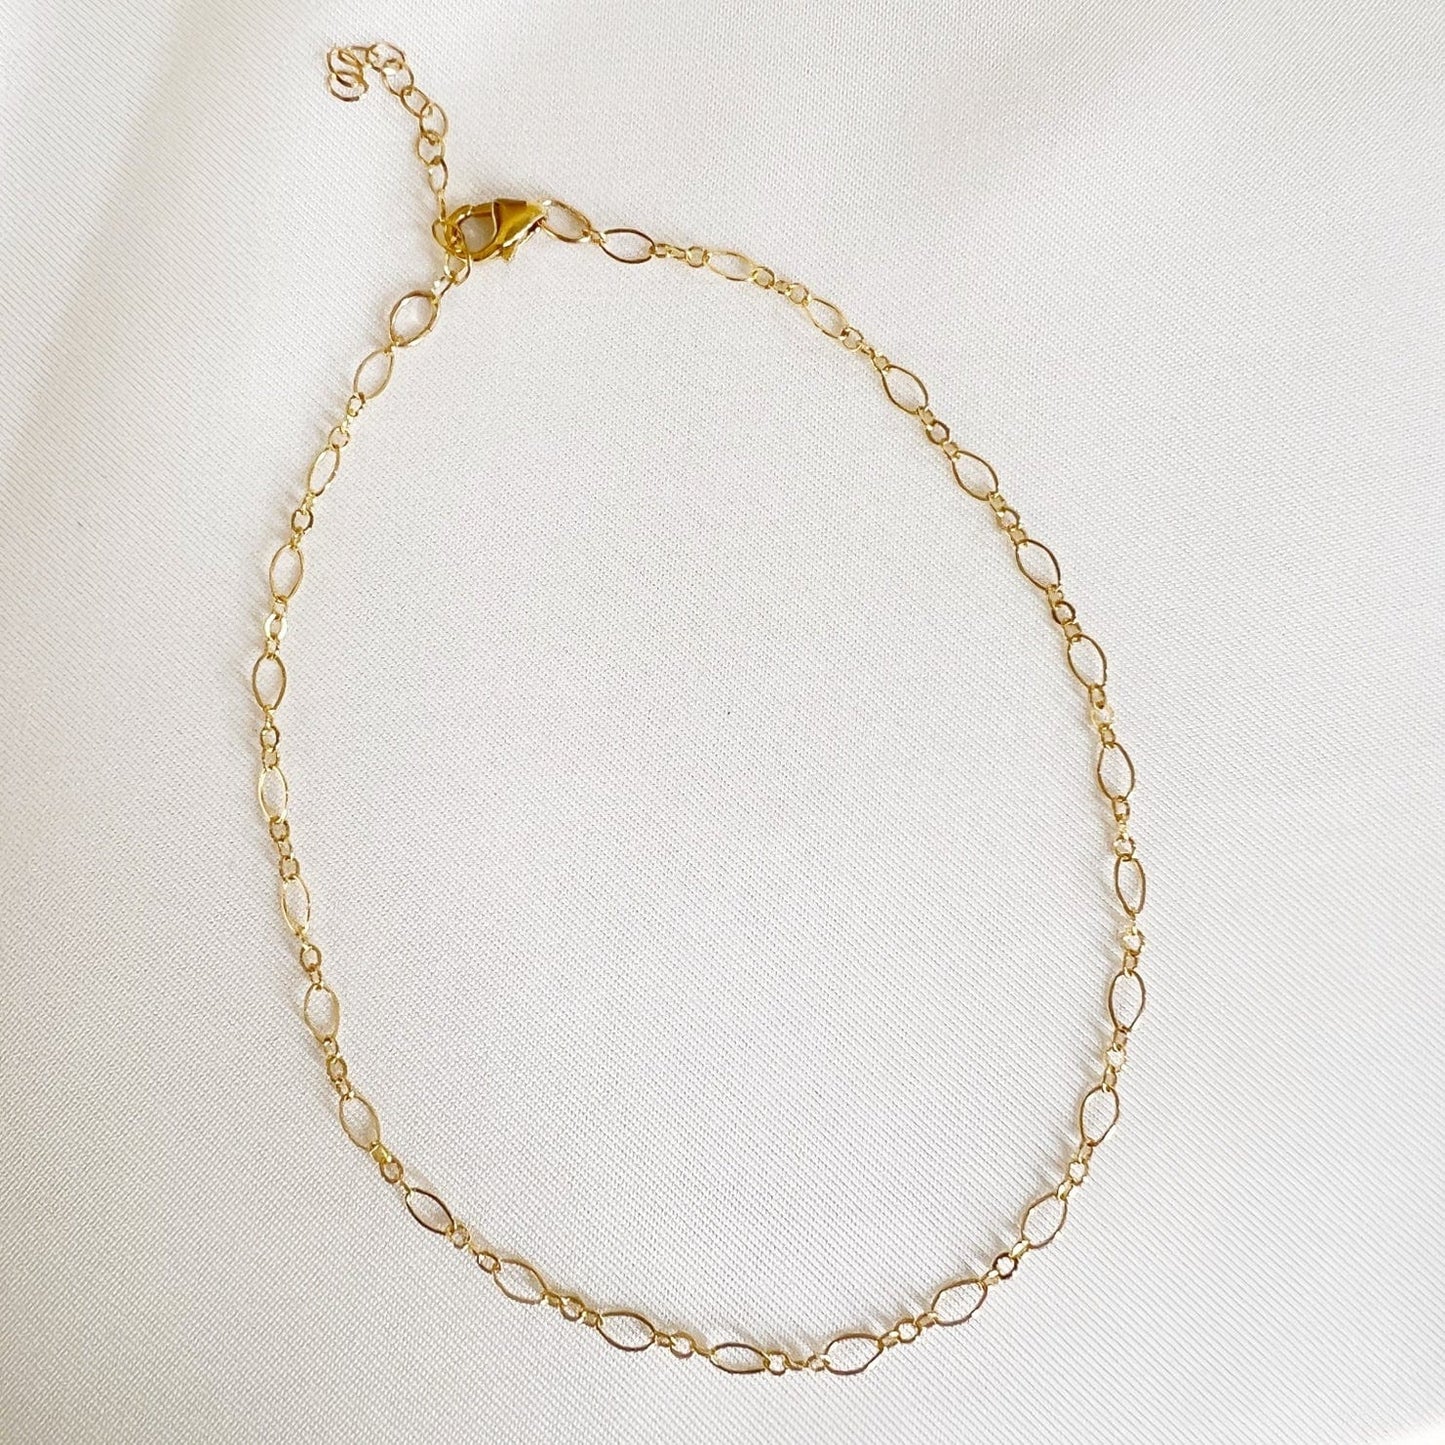 ANK-GF Amour Dainty Chain Gold Filled Anklet